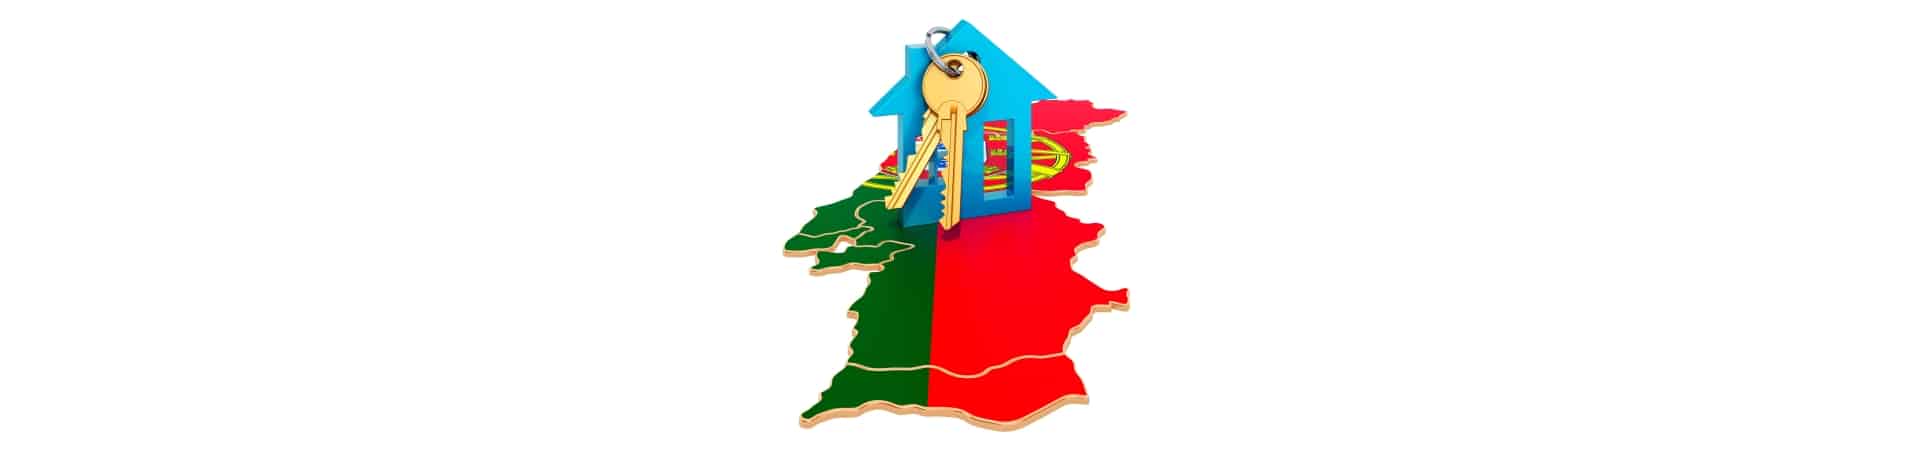 Power of attorney for buying or selling property in Portugal